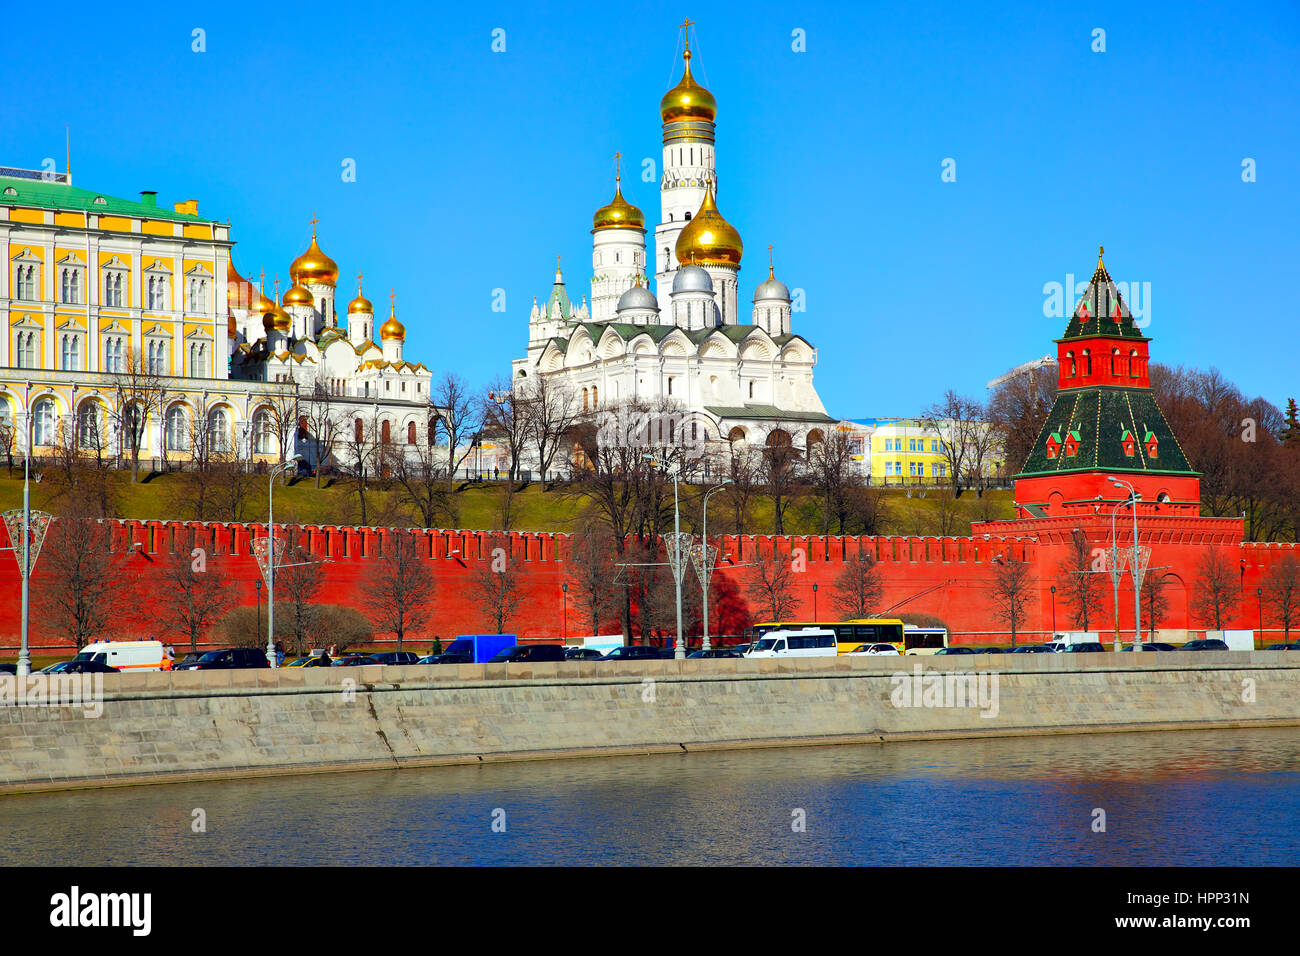 The Moscow Kremlin, Russia Stock Photo